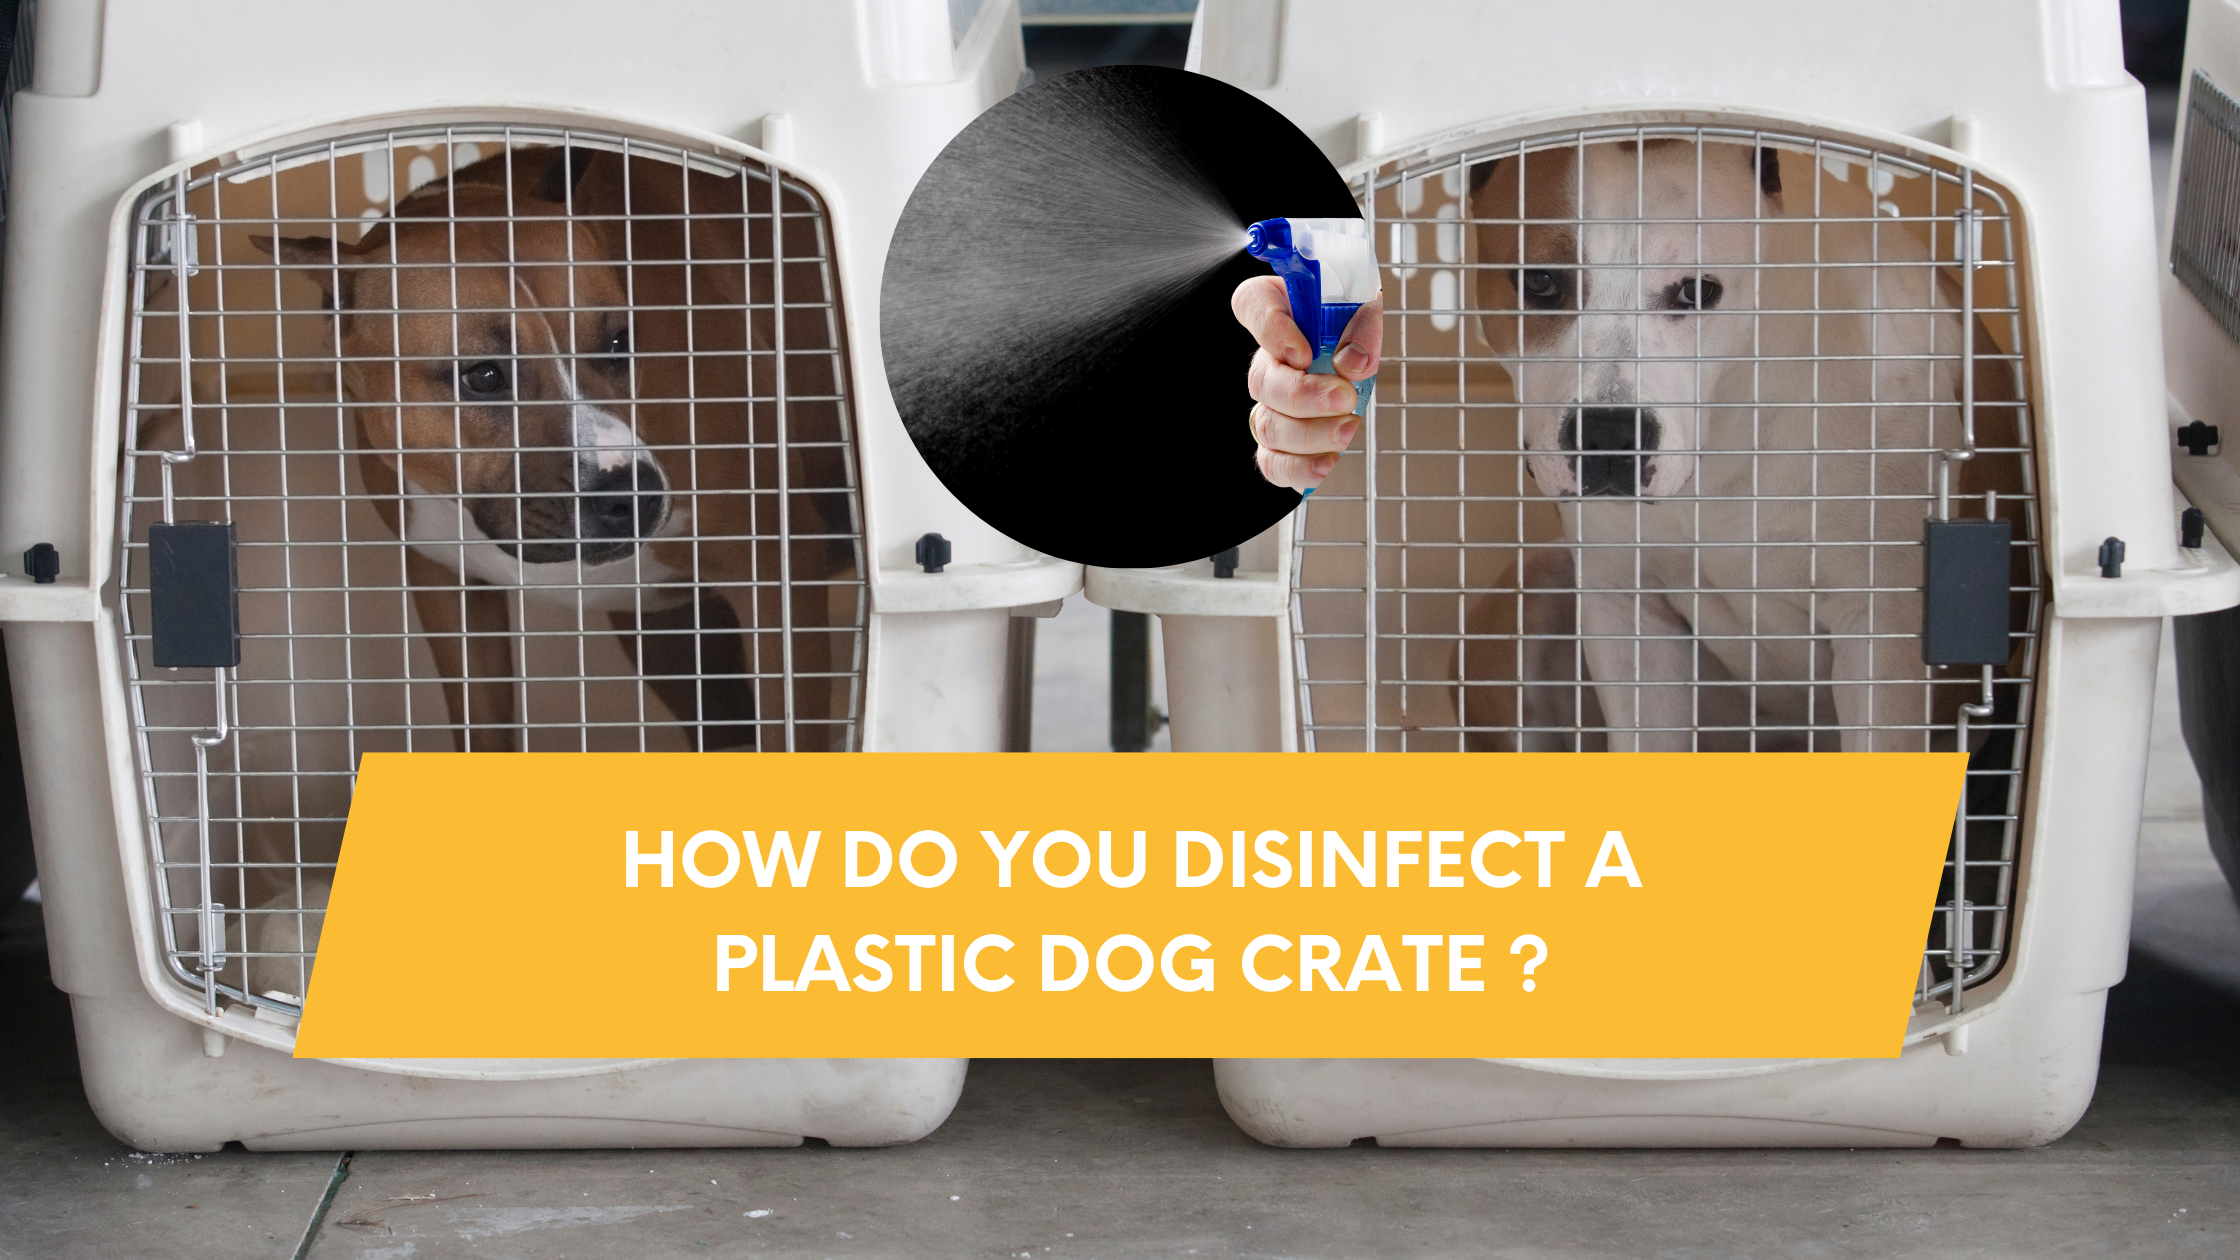 How do you disinfect a plastic dog crate